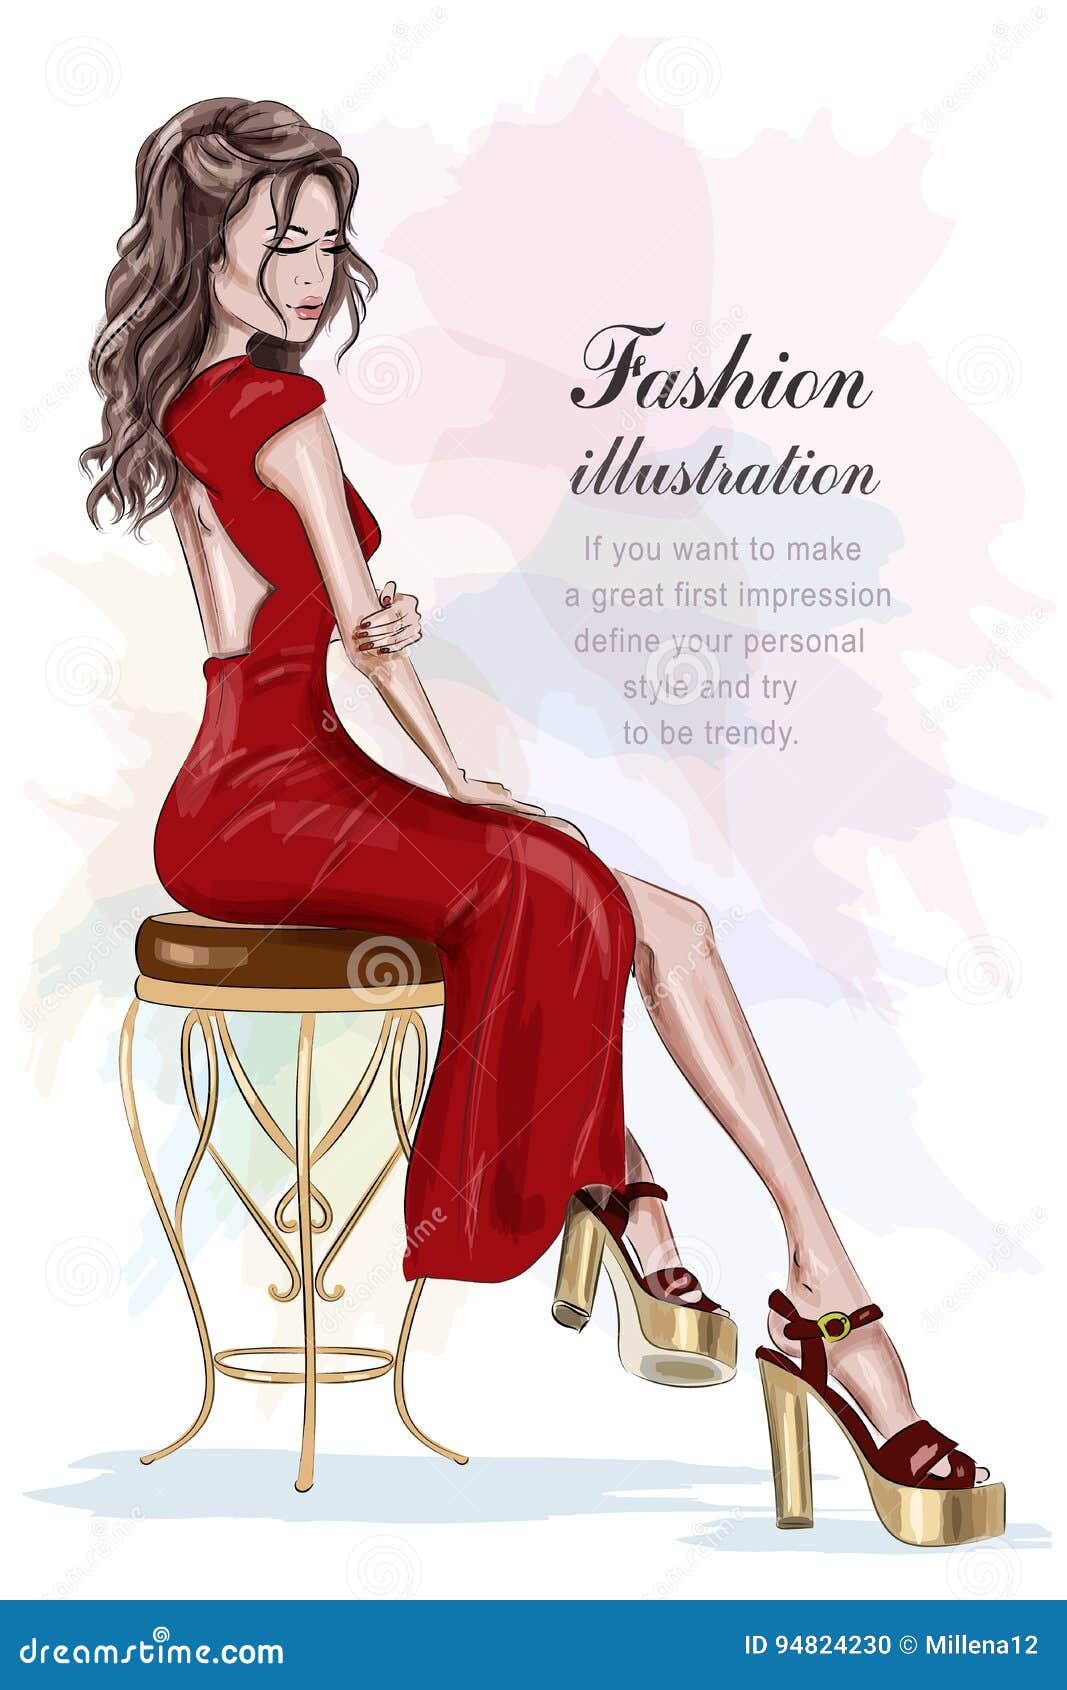 45+ Best Fashion Design Sketches for your Inspiration